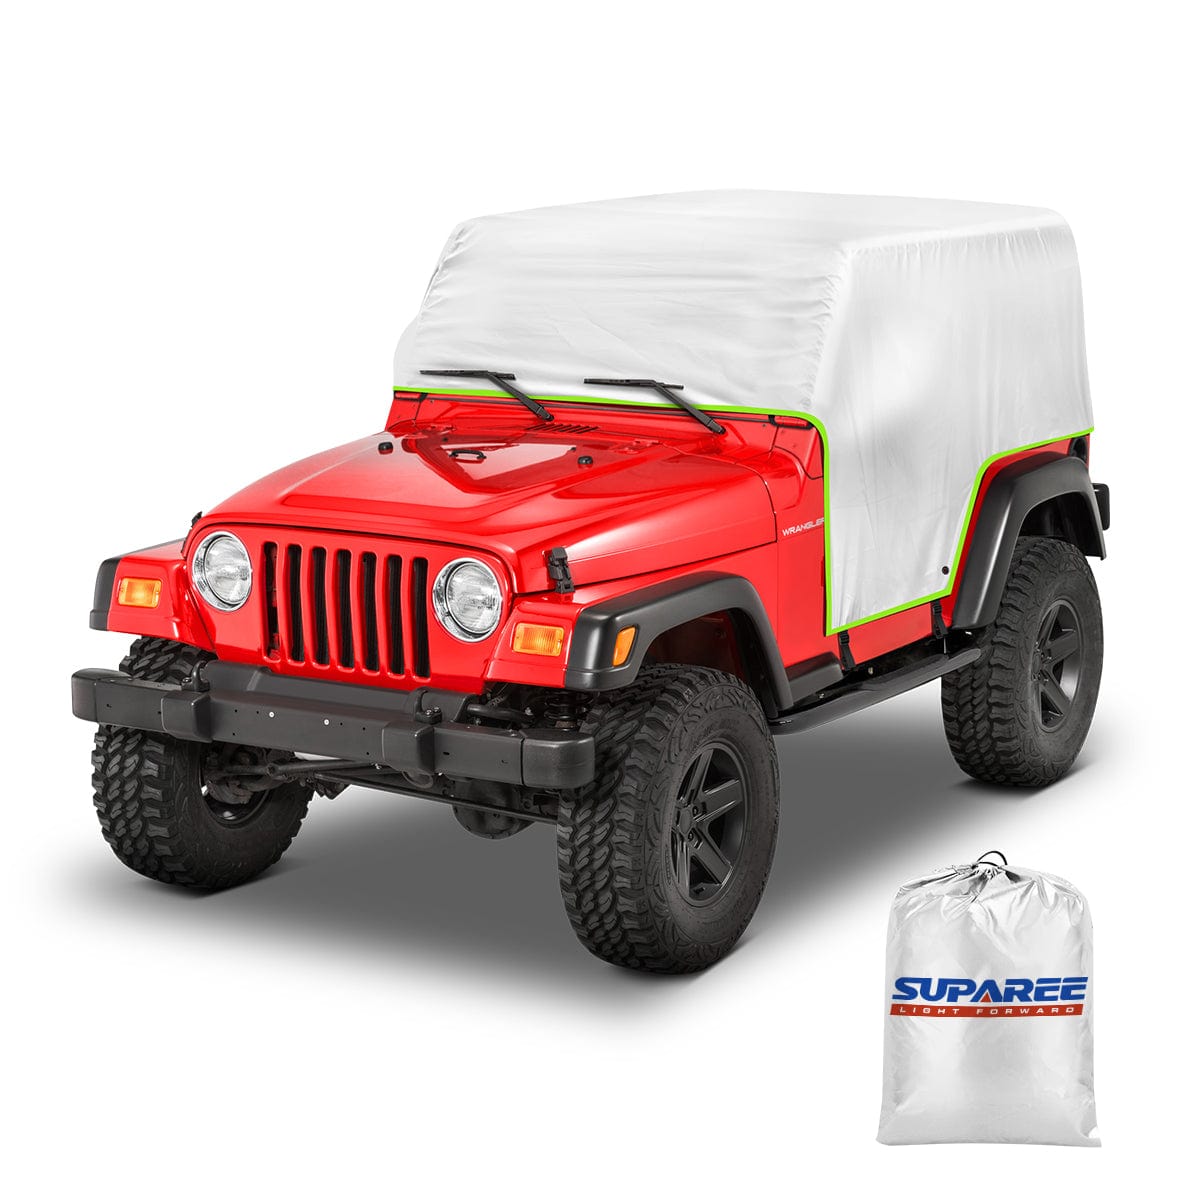 SUPAREE Jeep Cover Suparee Jeep Cab Cover Waterproof for 1976-2006 Wrangler YJ TJ 2 Door Product description